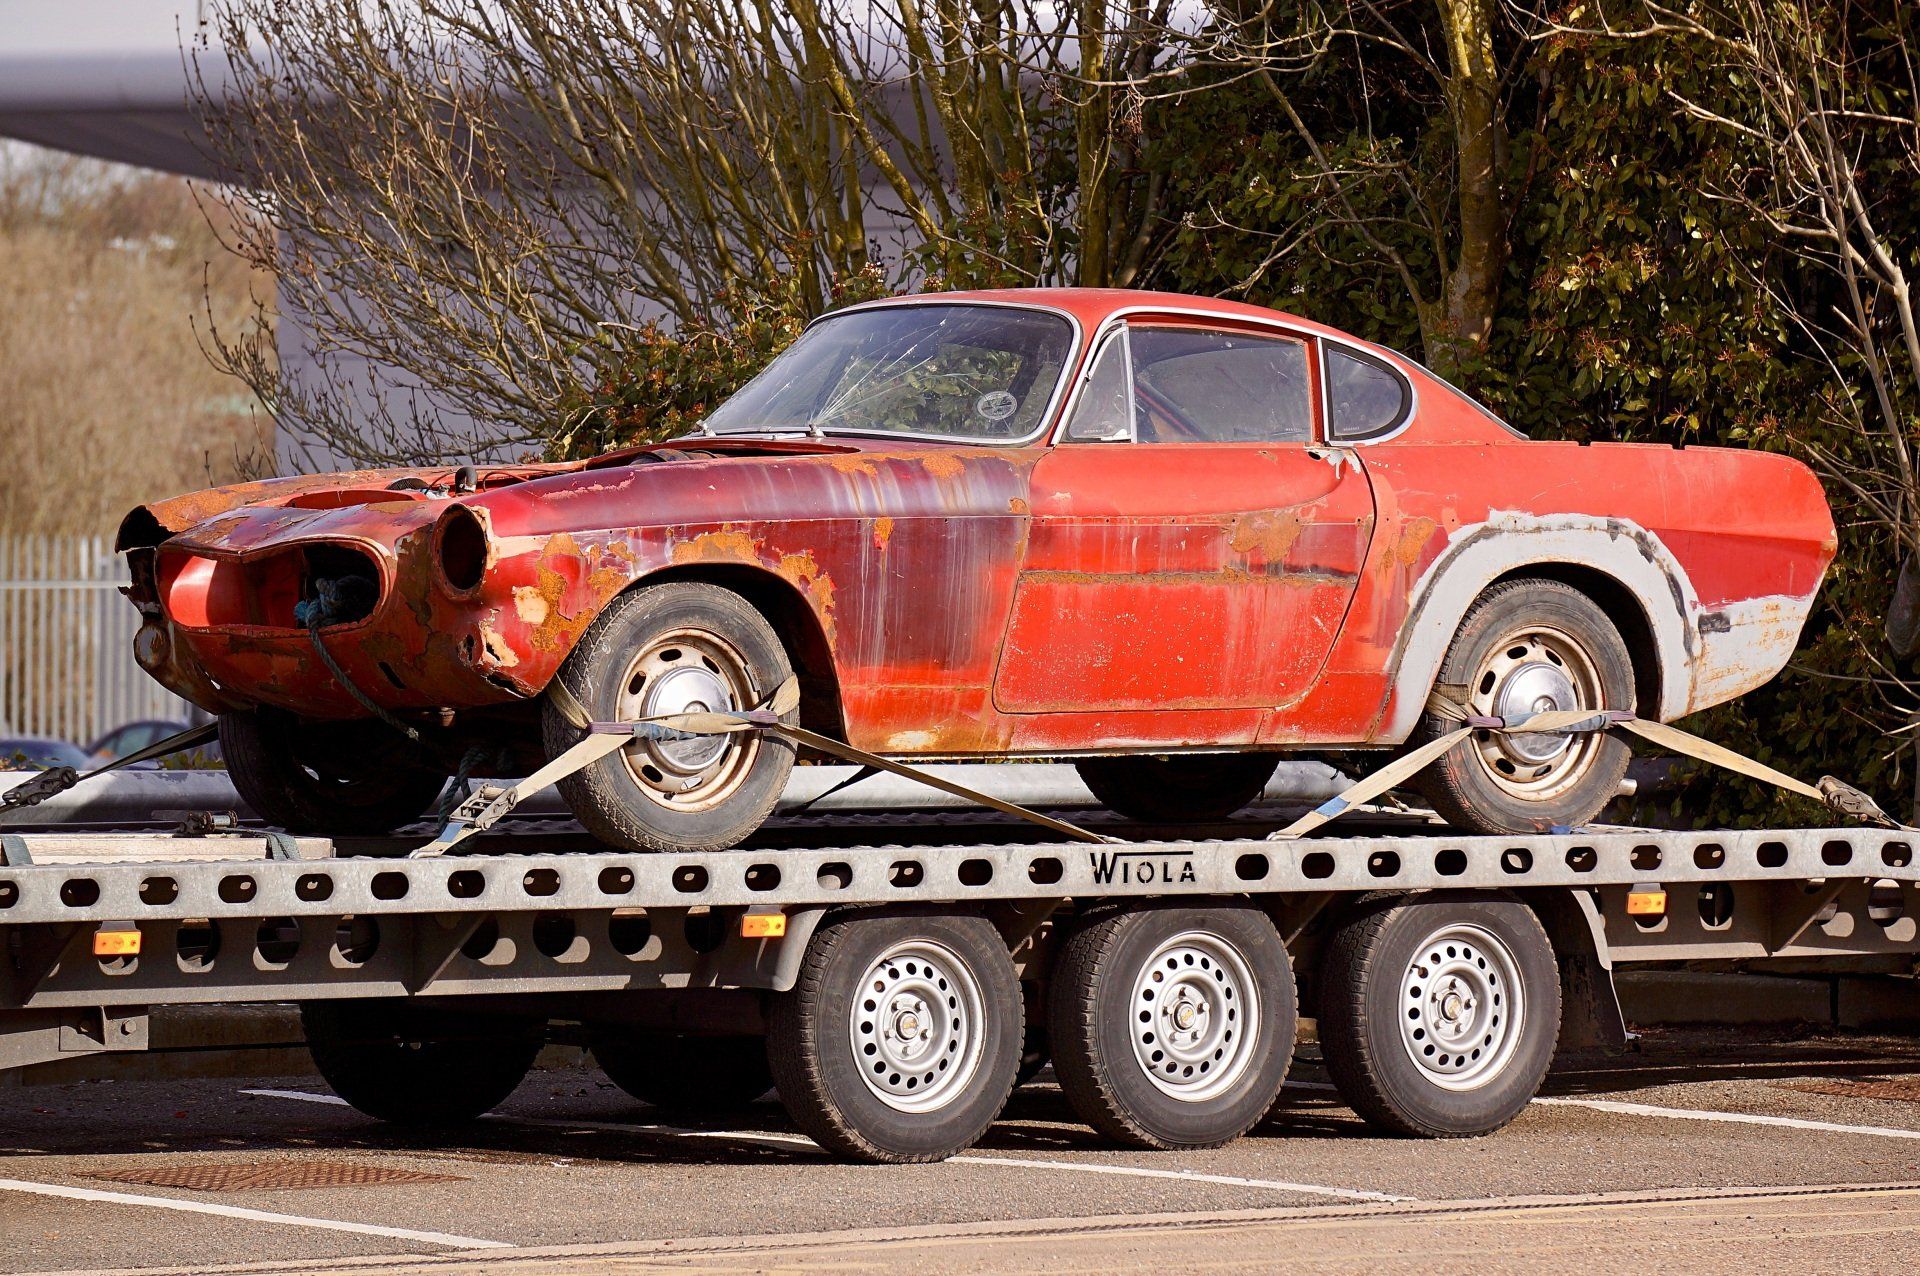 A vintage sportscar being moved by a flatbed truck